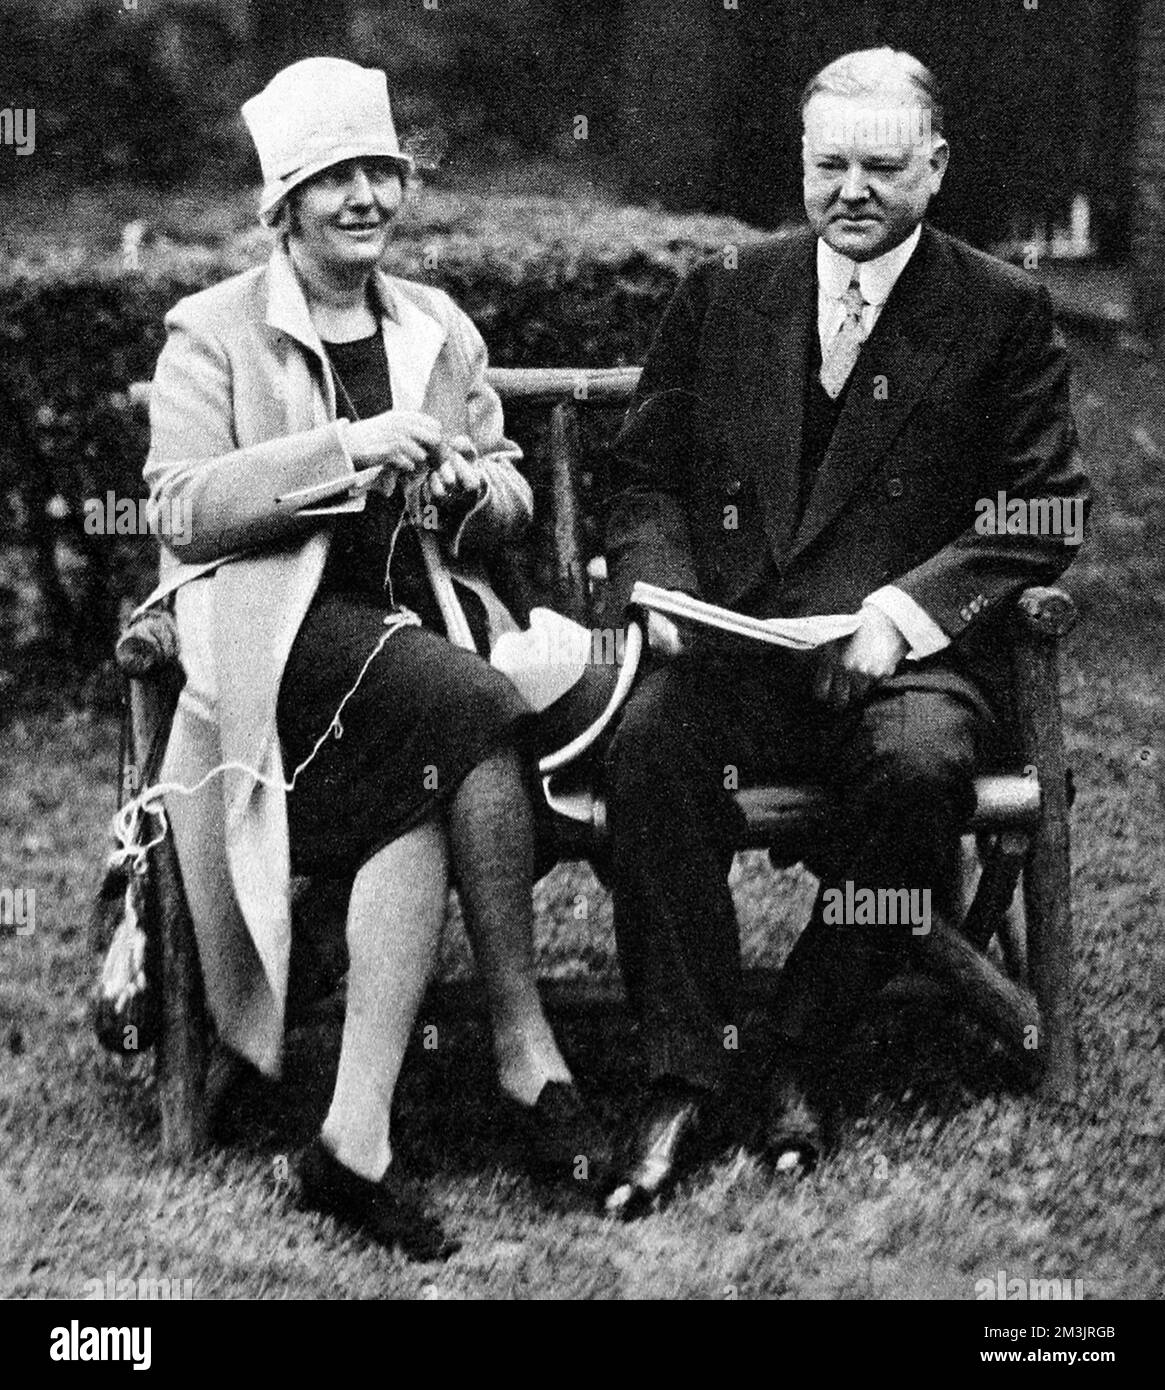 The Republican Party's candidate for the Presidency of the United States. Mr Herbert Hoover and his wife in the Washington House. Born in 1874 he was involved in the relief activities in World War I. In 1928 he defeated Al Smith, the Democratic candidate and became President. Due to his demise in popularity he was defeated in his re-election bid in 1932 by Franklin D. Roosevelt.     Date: 1928 Stock Photo